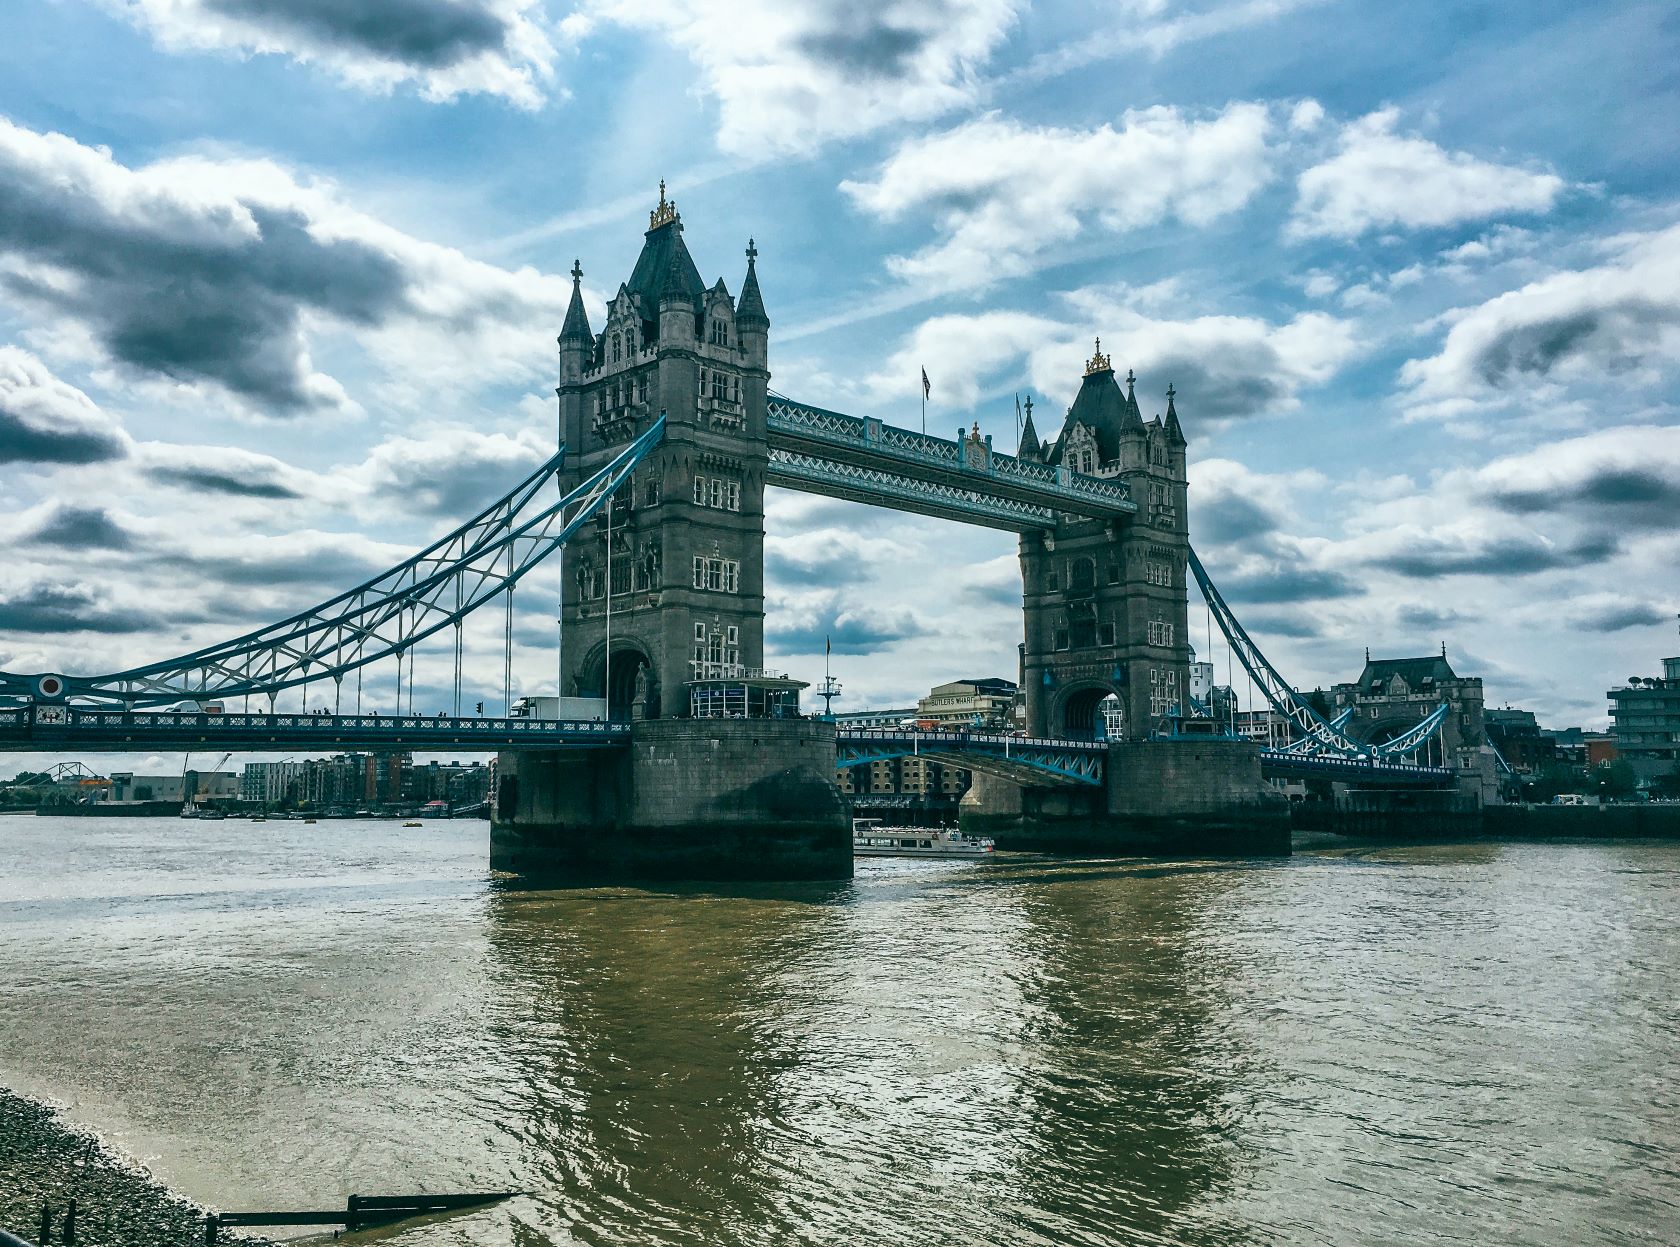 Tower Bridge is the most iconic bridge in London. It can viewed perfectly from the Tower of London.